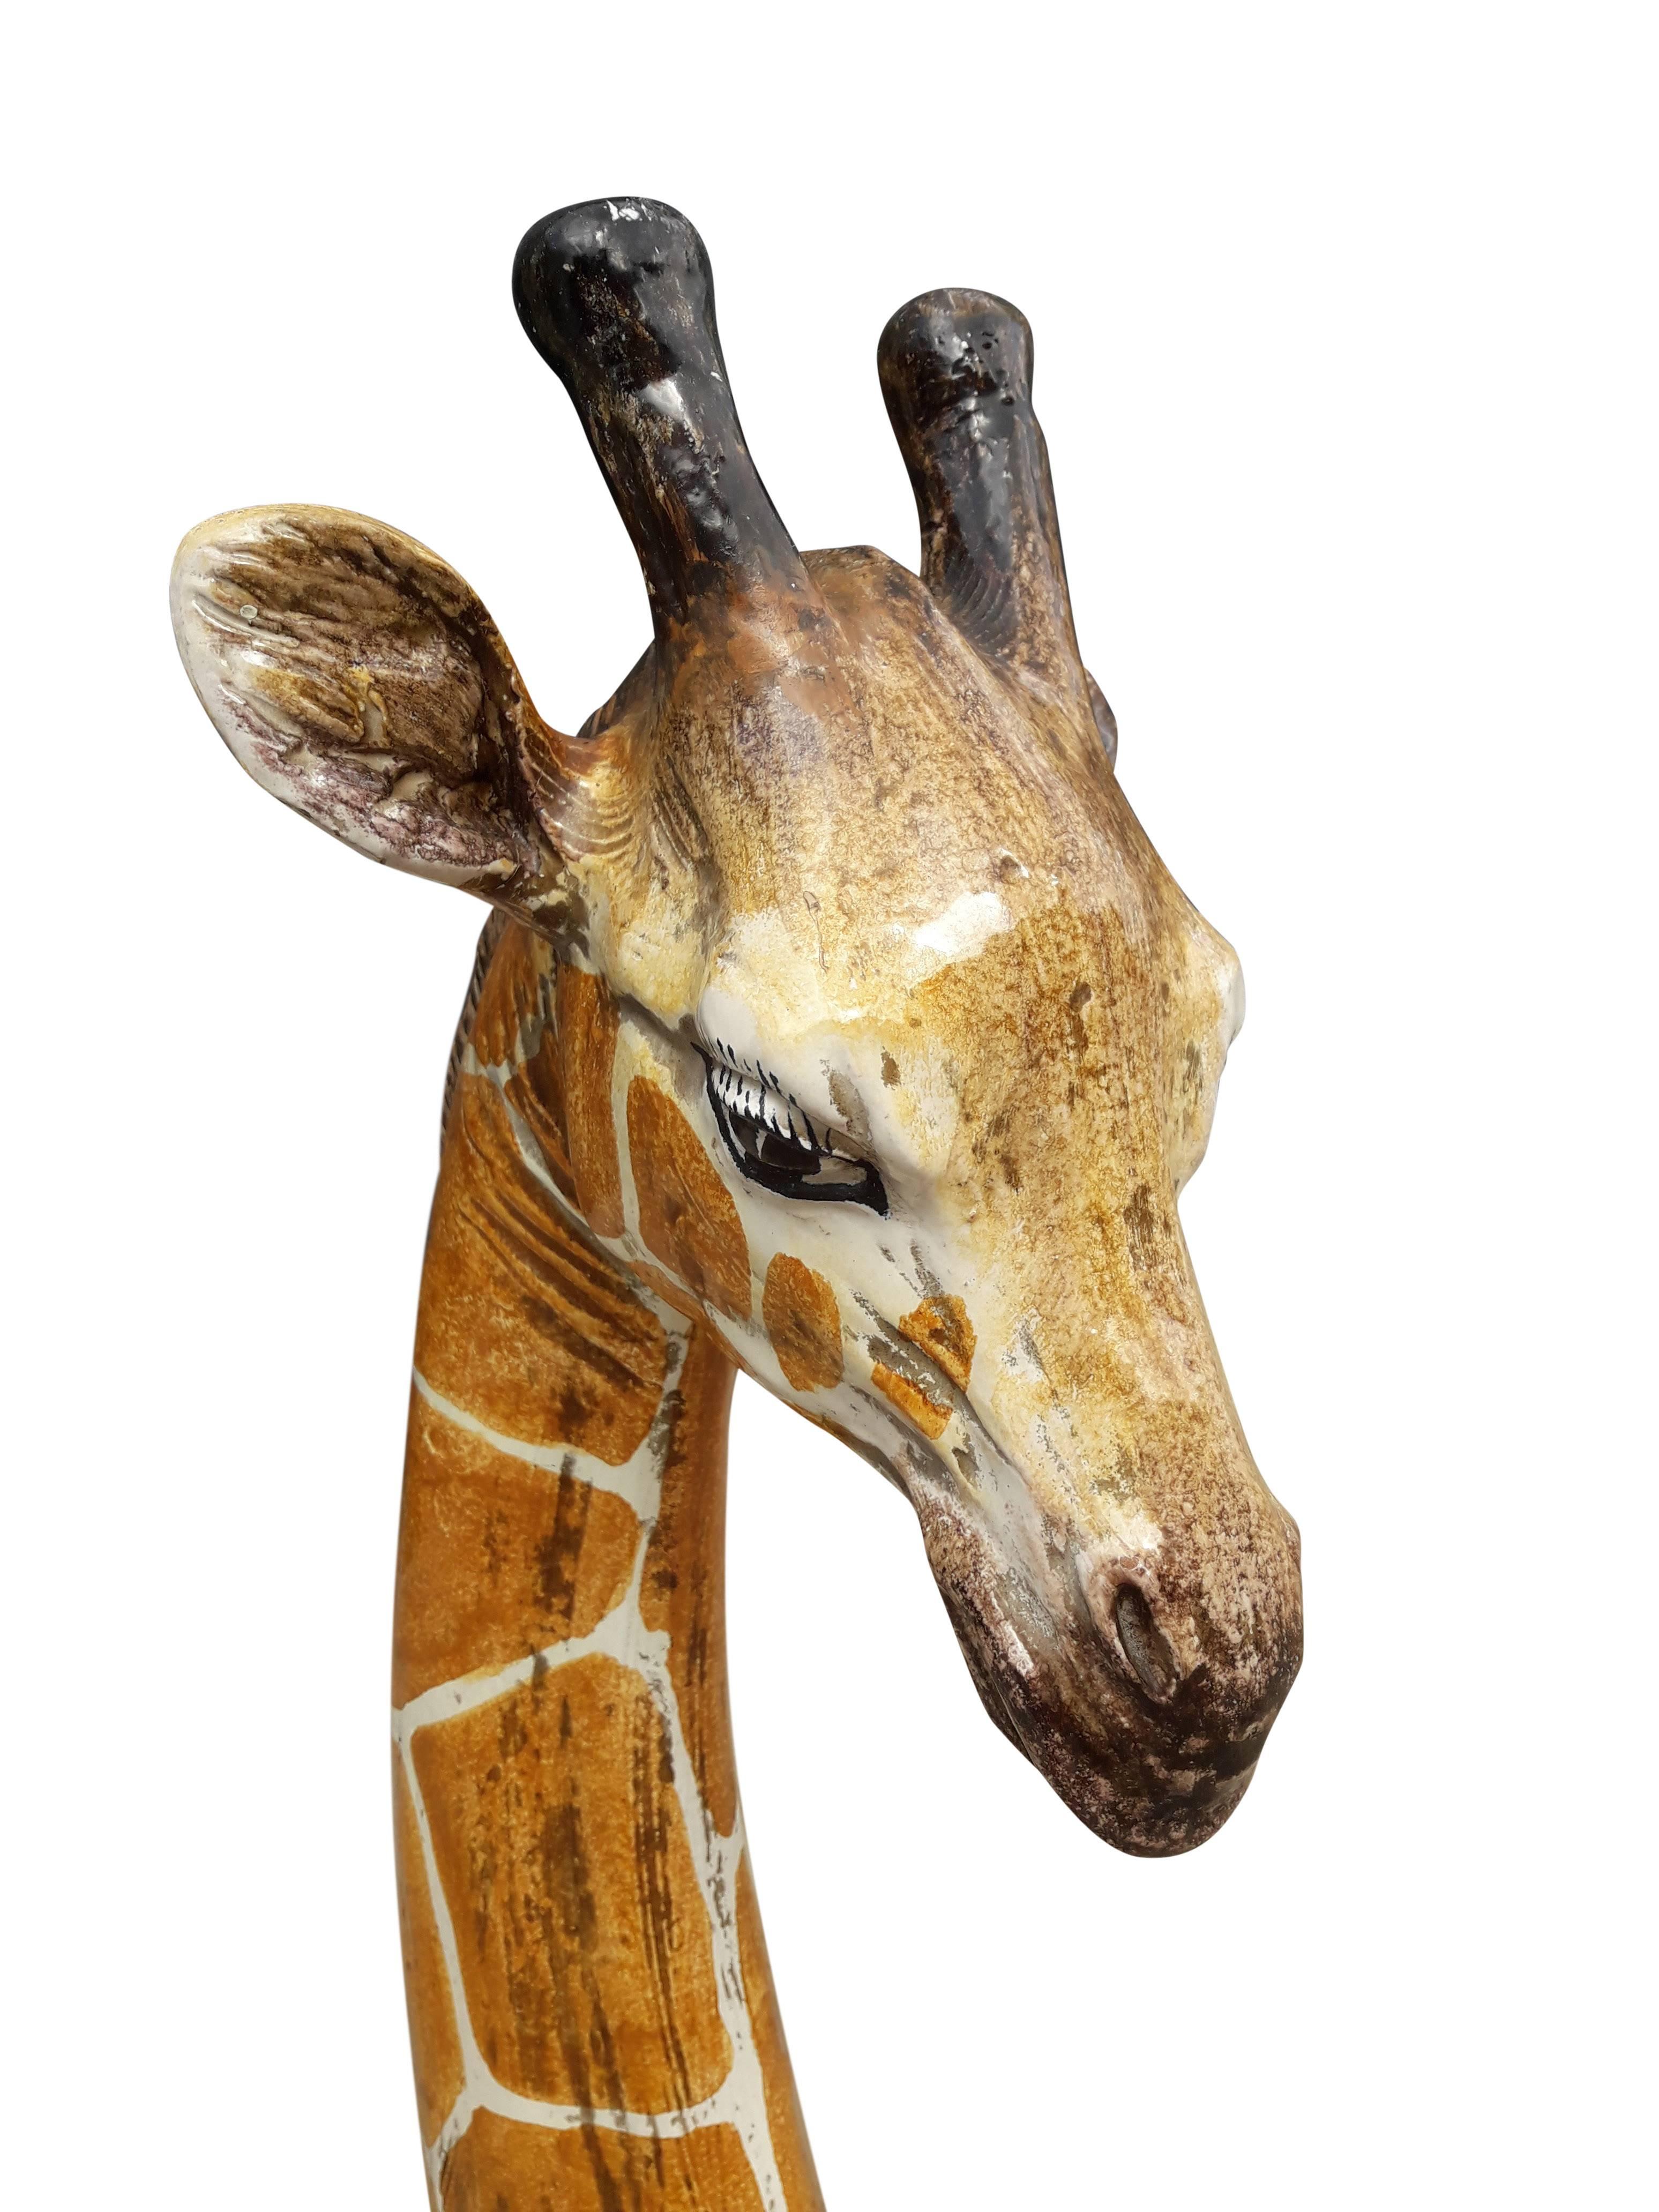 This is an amazing giraffe in glazed ceramic.
Paint by hand.
Vintage.
Marked made in Italy.

A very decorative piece in your interior!